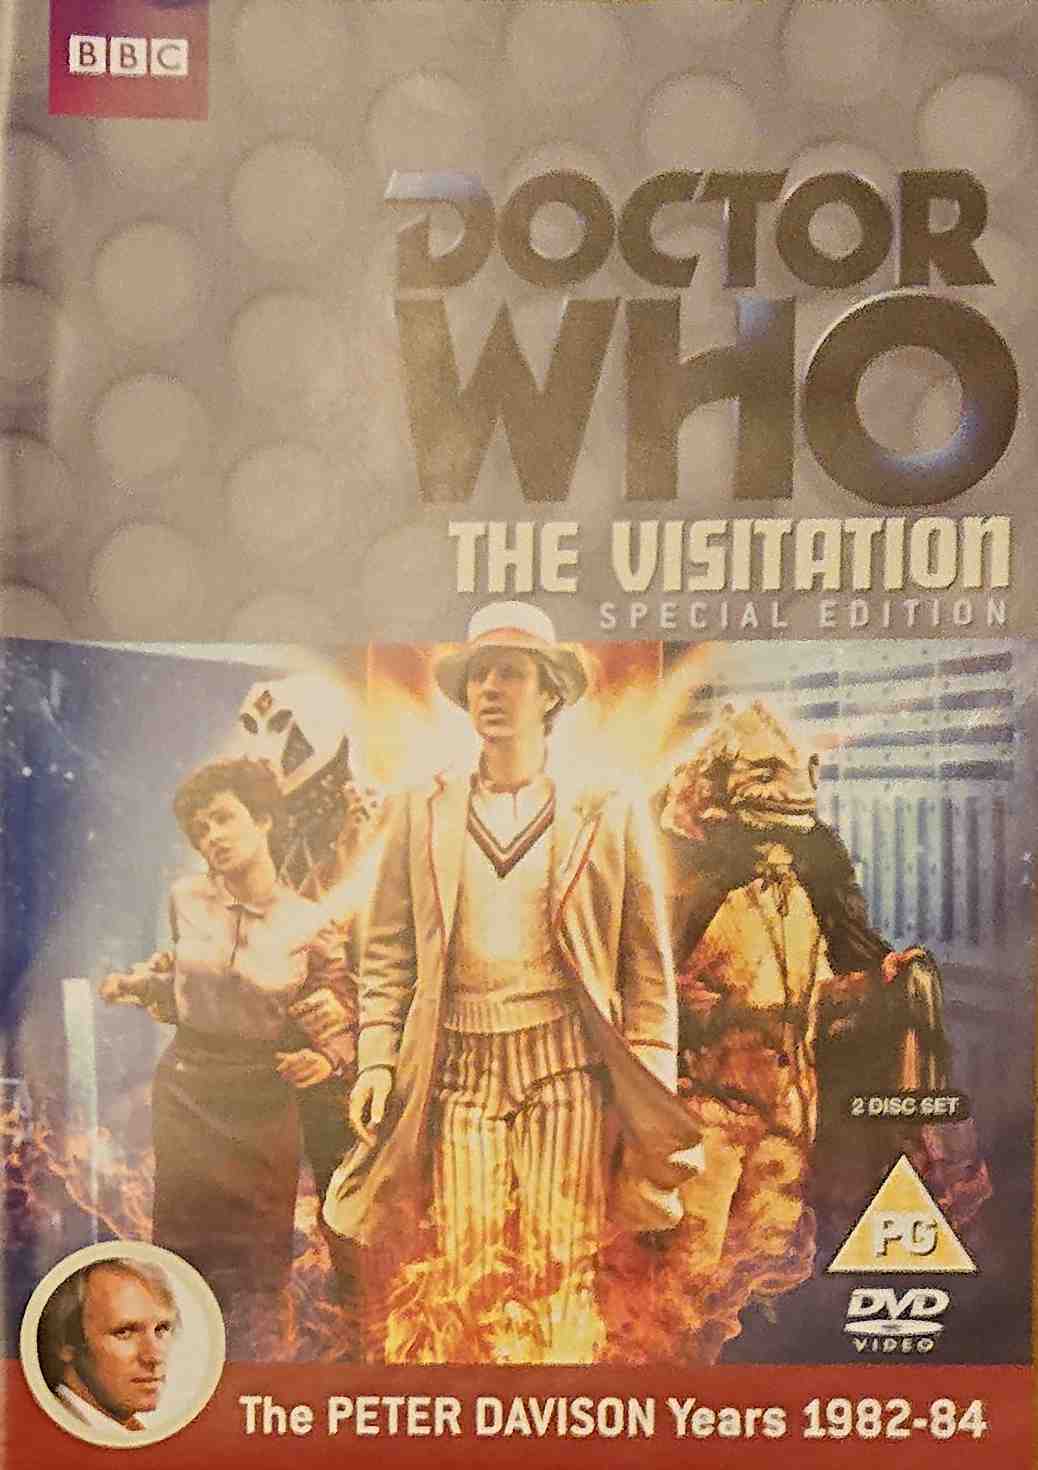 Picture of BBCDVD 3690 Doctor Who - The visitation by artist Eric Saward from the BBC dvds - Records and Tapes library